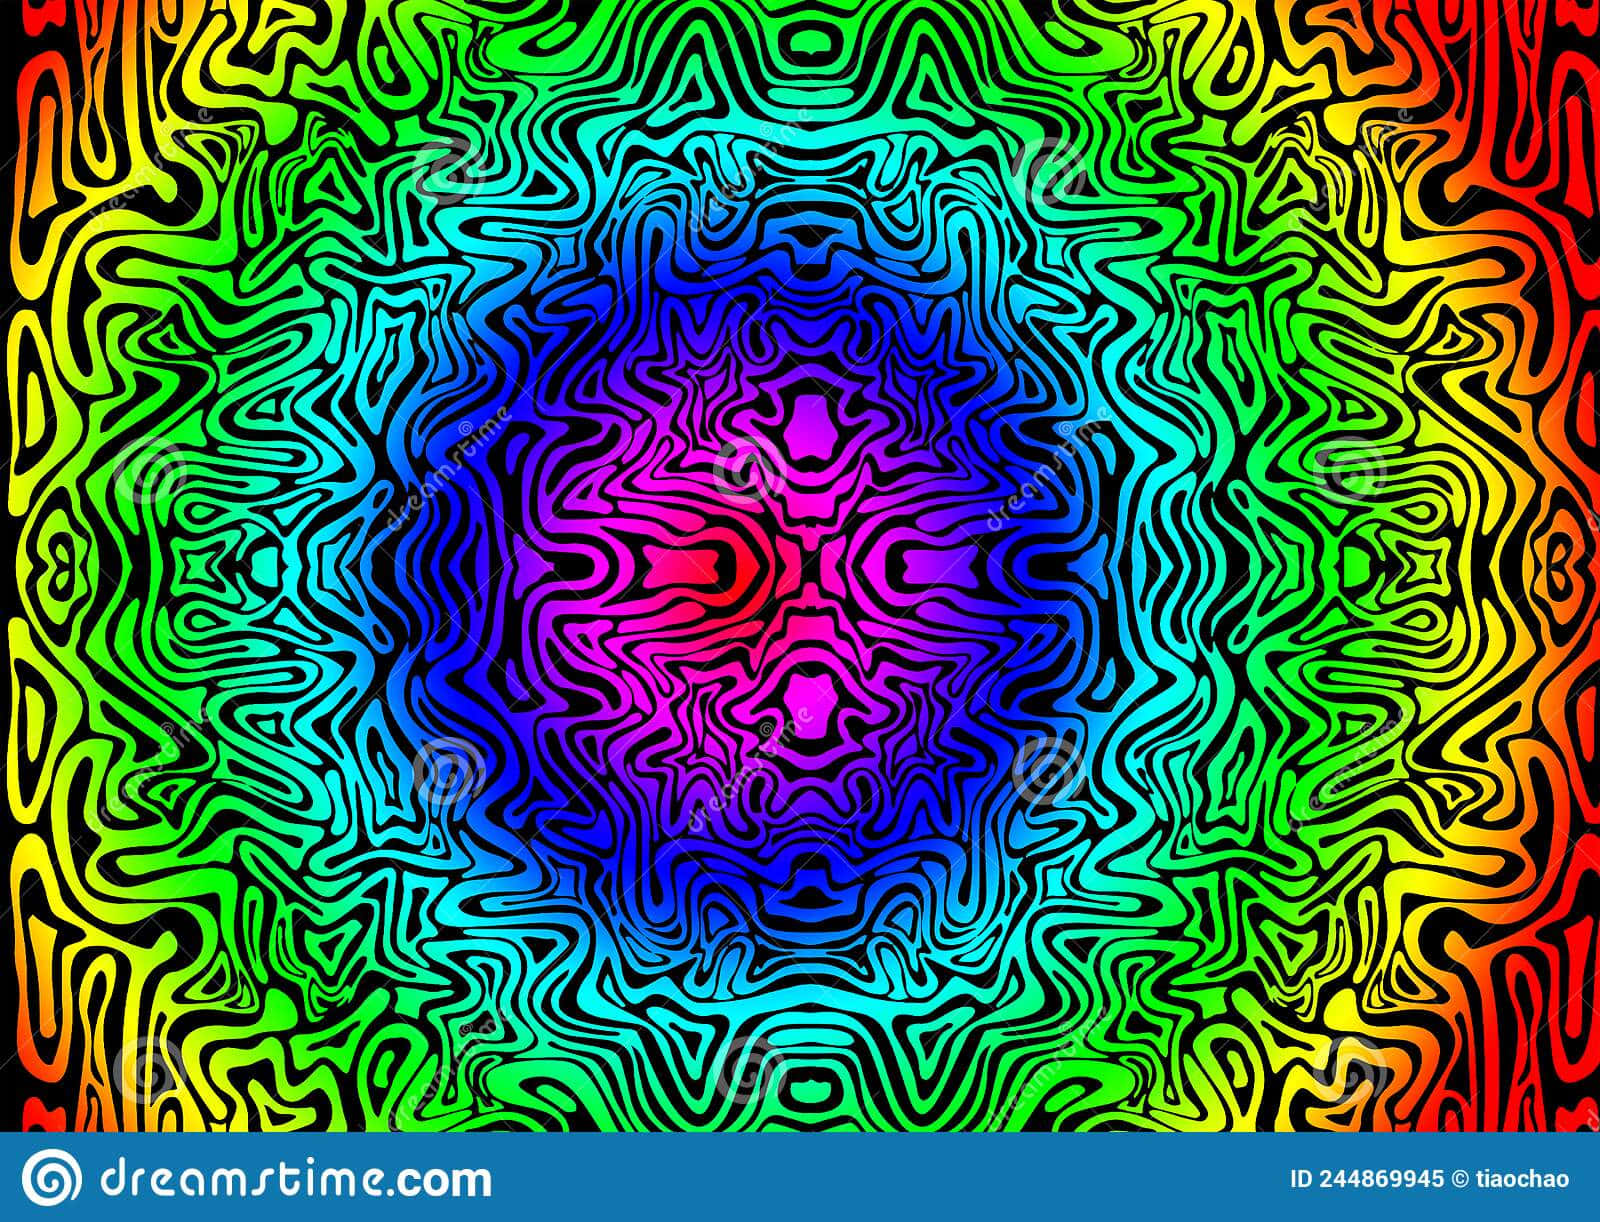 Vibrant and Colorful Psychedelic Colors Wallpaper